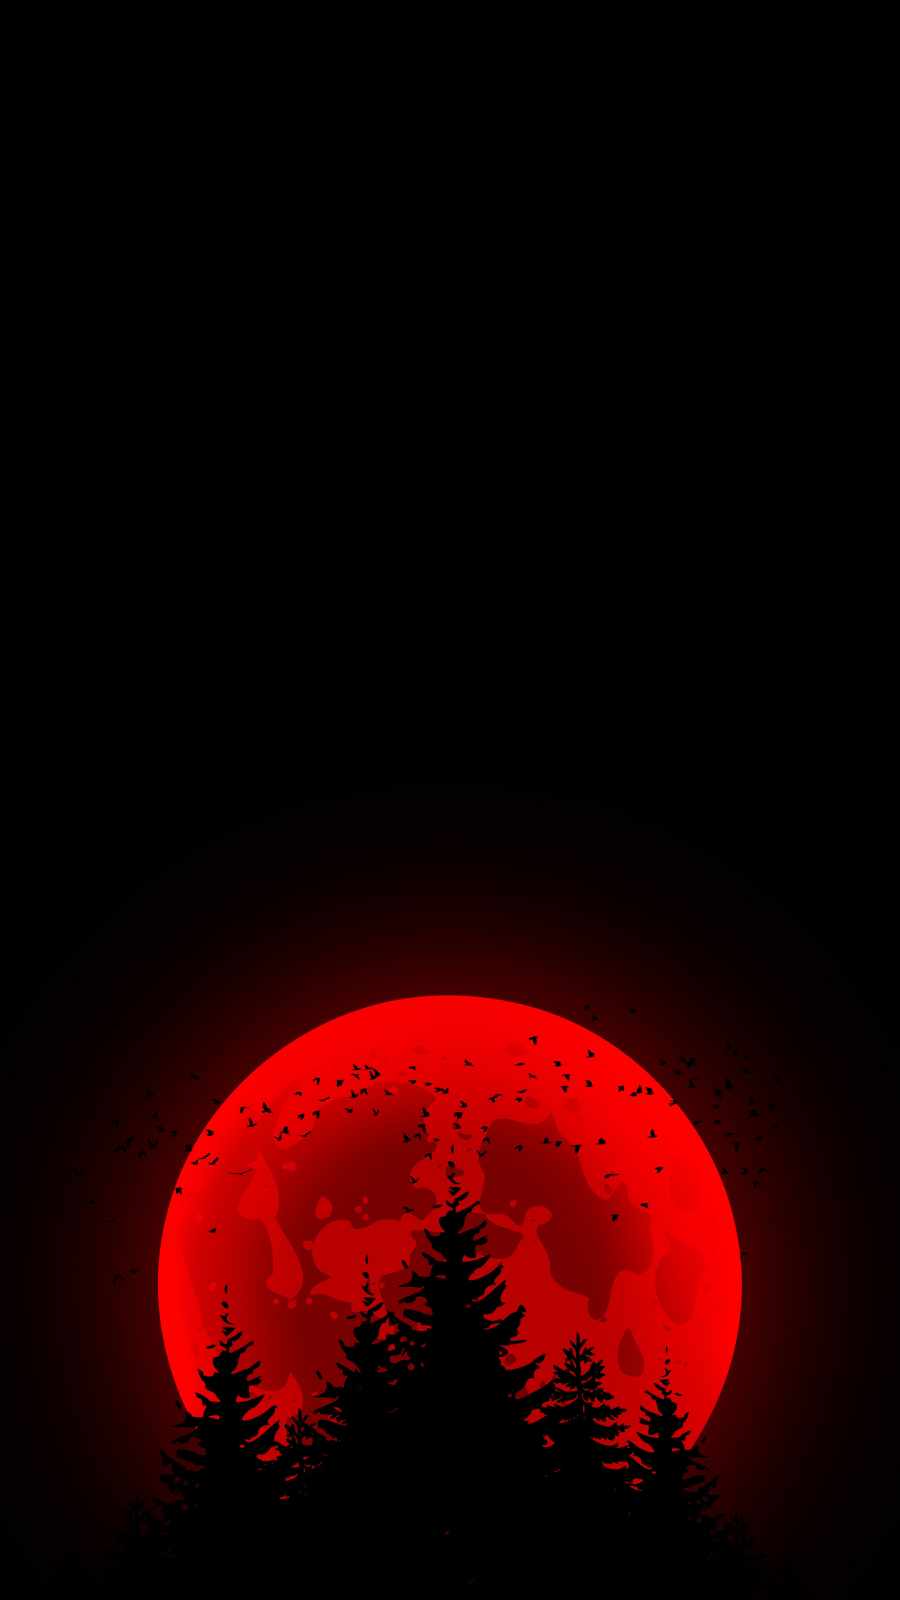 Red Moon Amoled - IPhone Wallpapers : iPhone Wallpapers